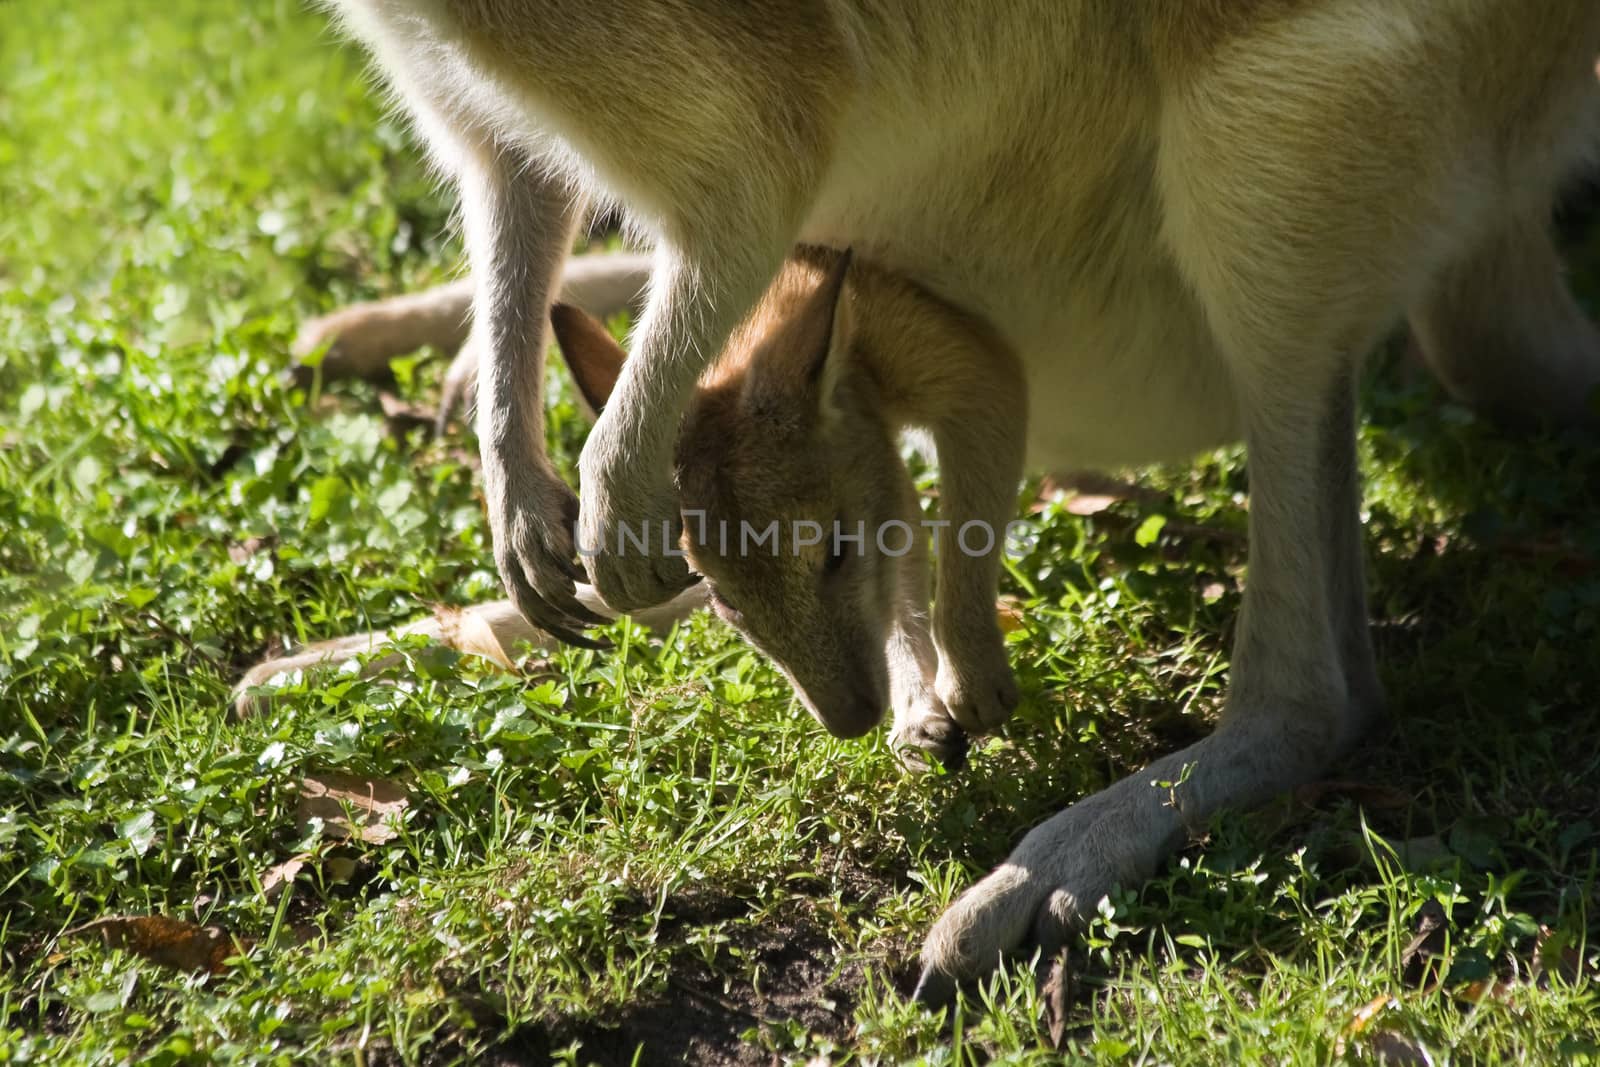 Female wallaby with joey in puch on grass in close view